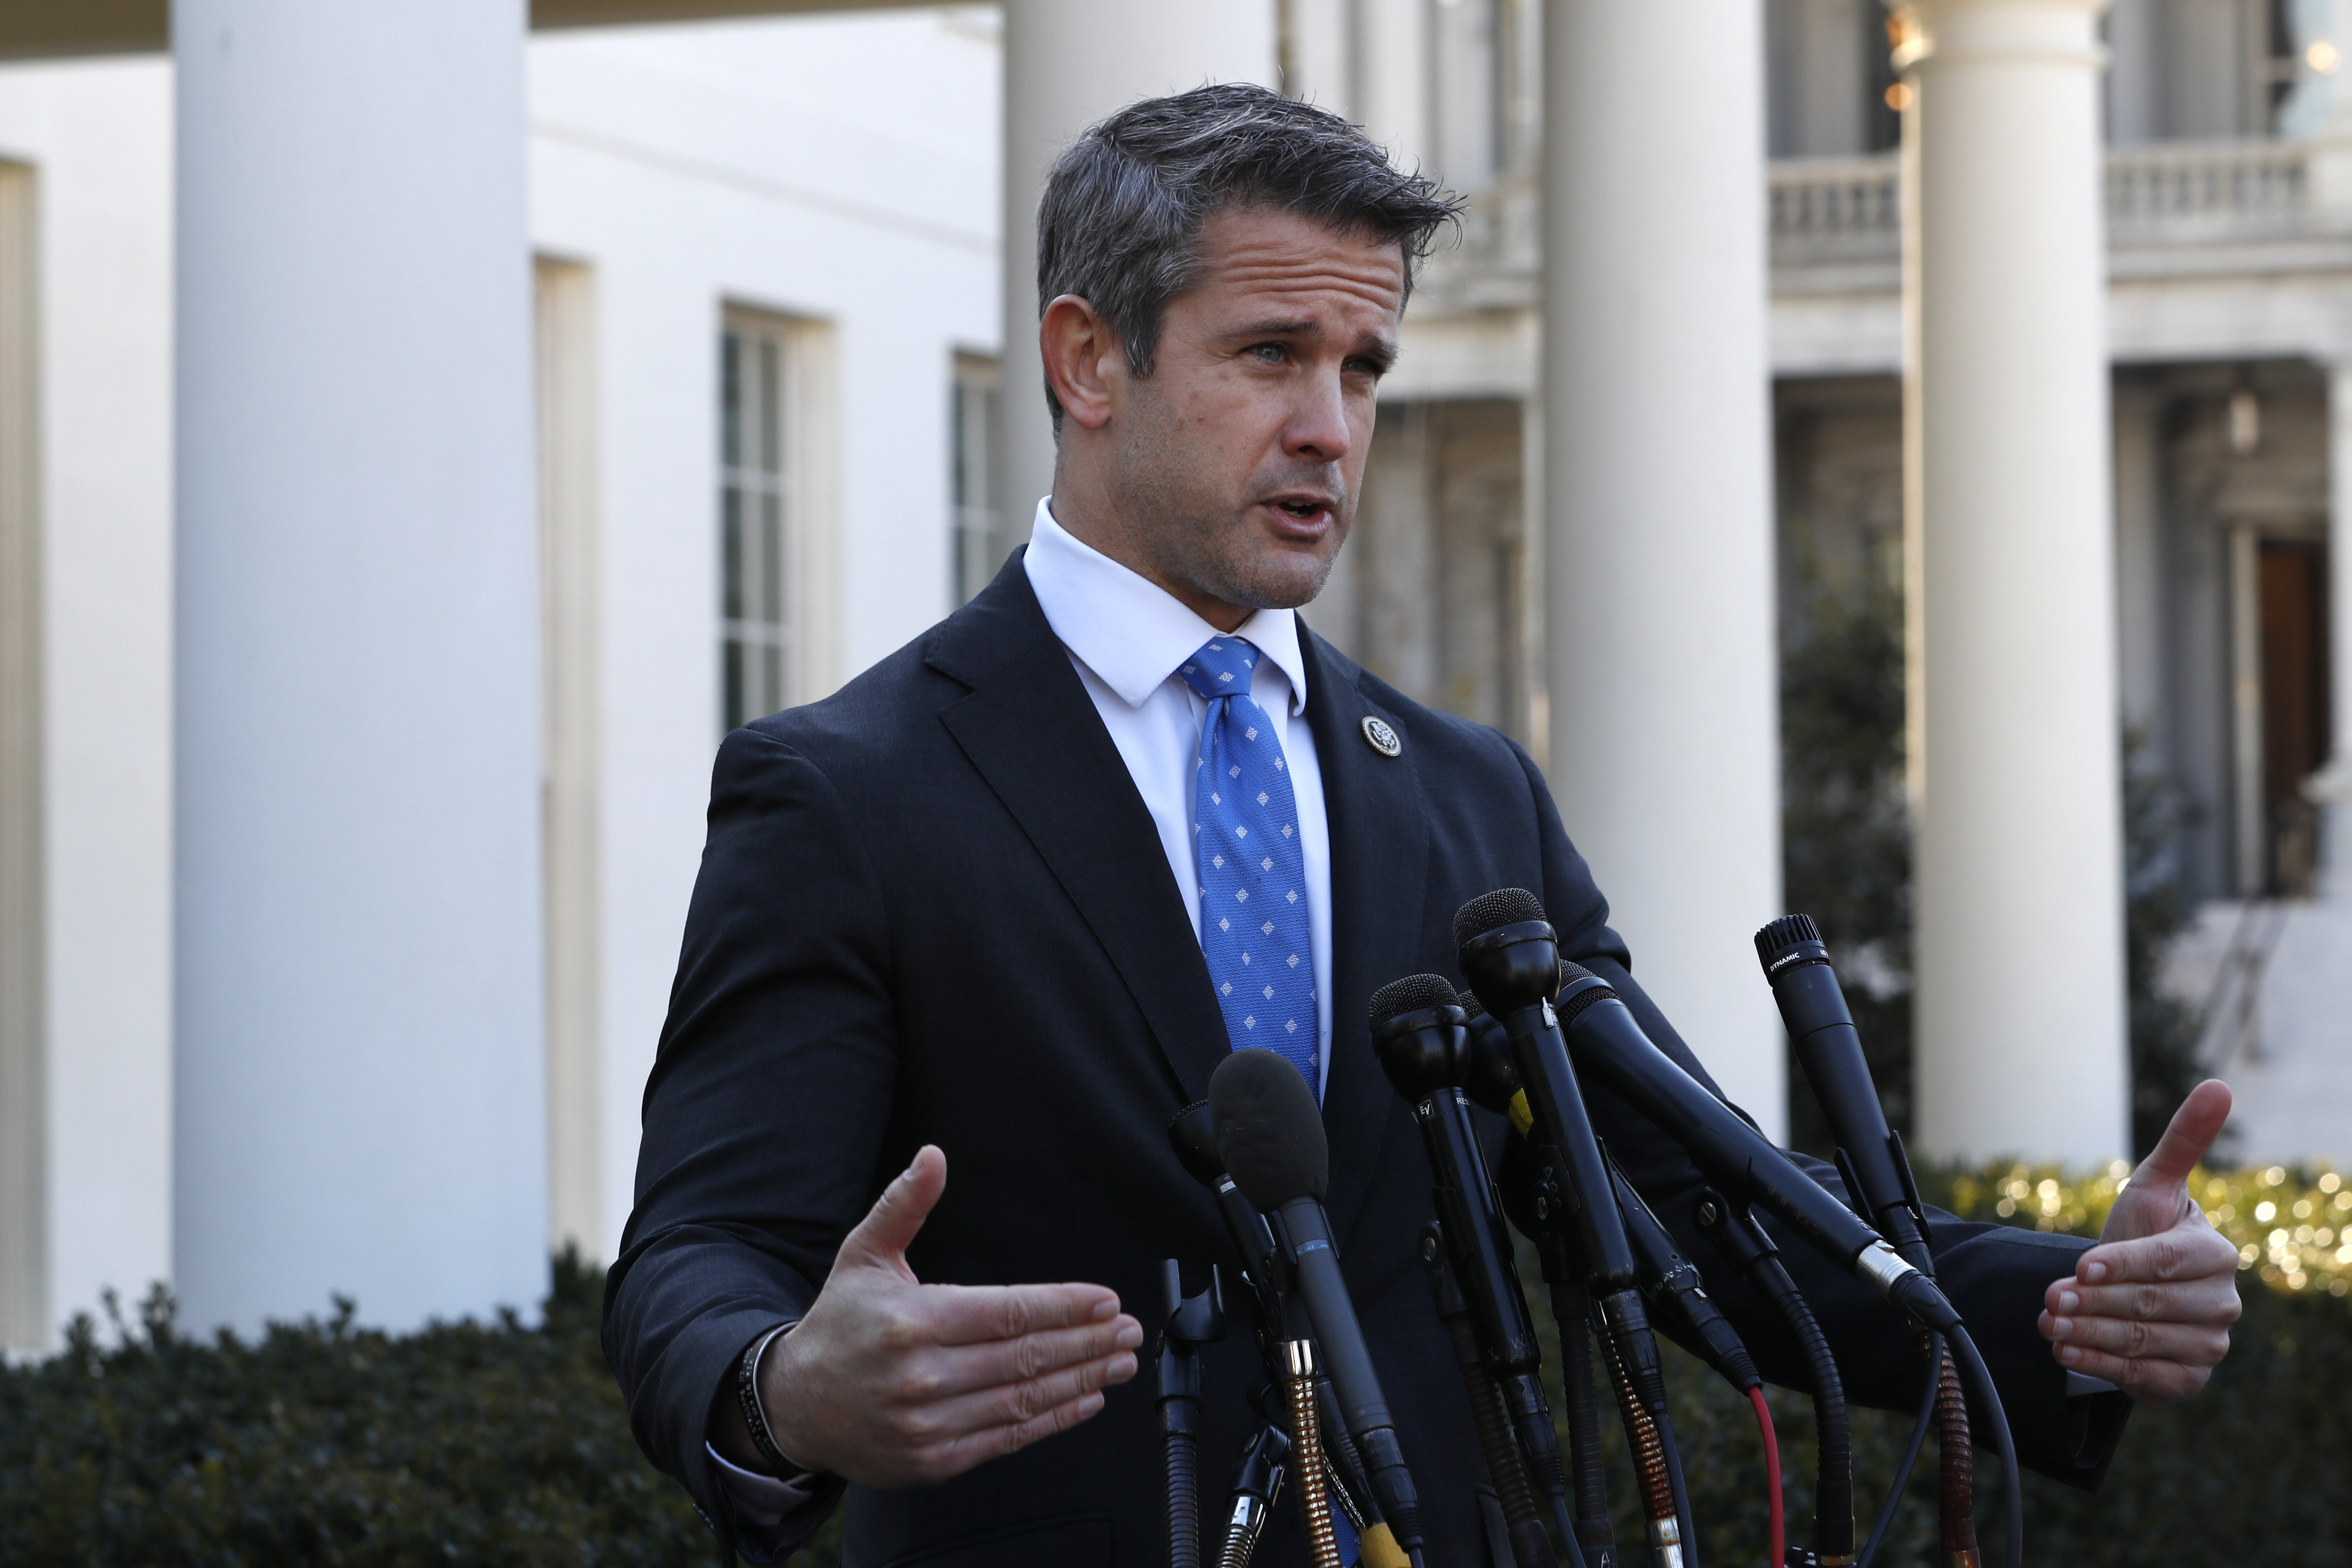 U.S. Rep. Adam Kinzinger's press call over impeachment, other issues